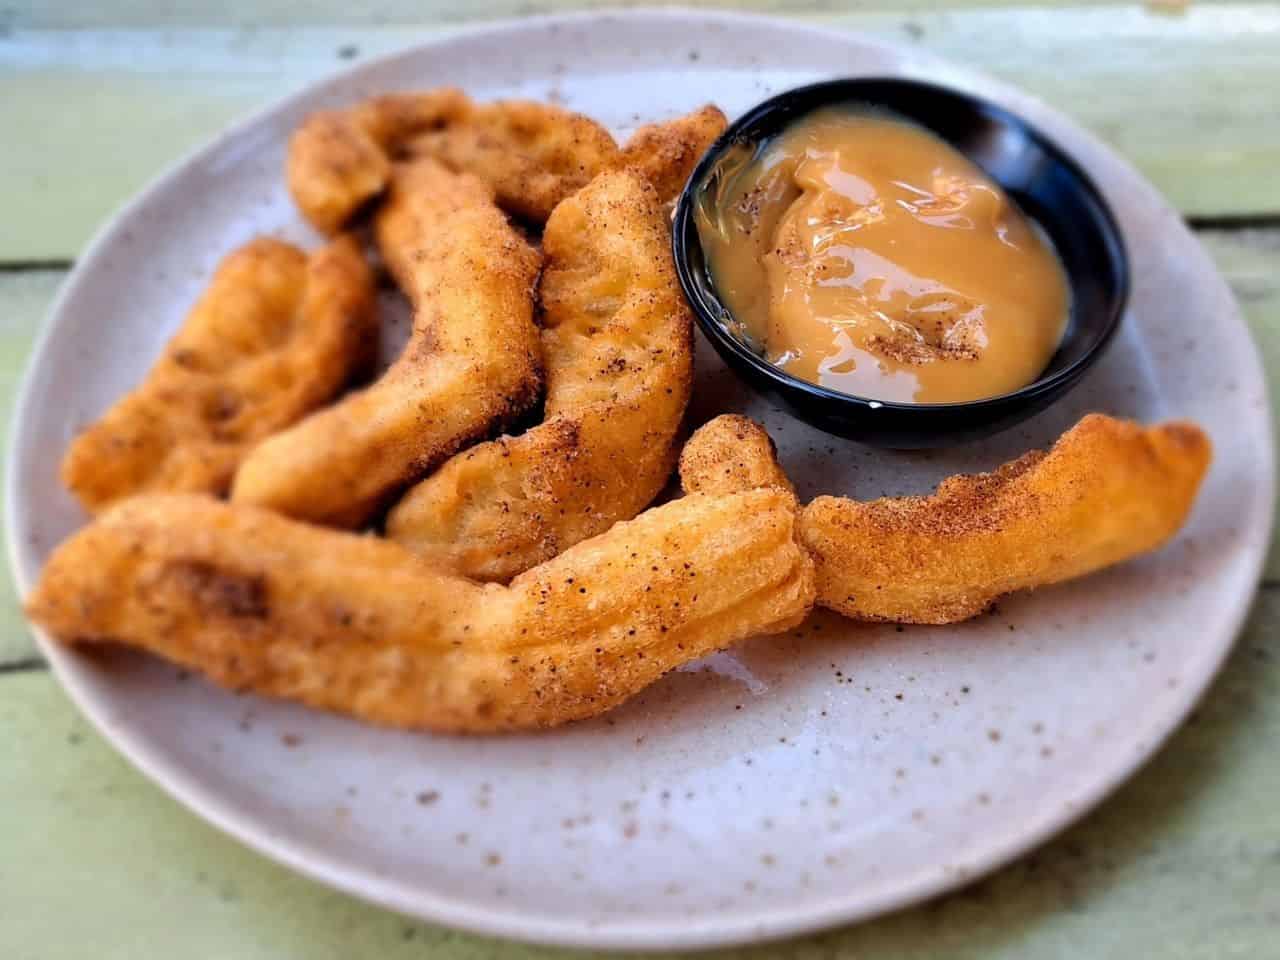 Churros and Dulce de Leche dip are on the dessert menu at Reposados Tacos in Golden British Columbia Canada